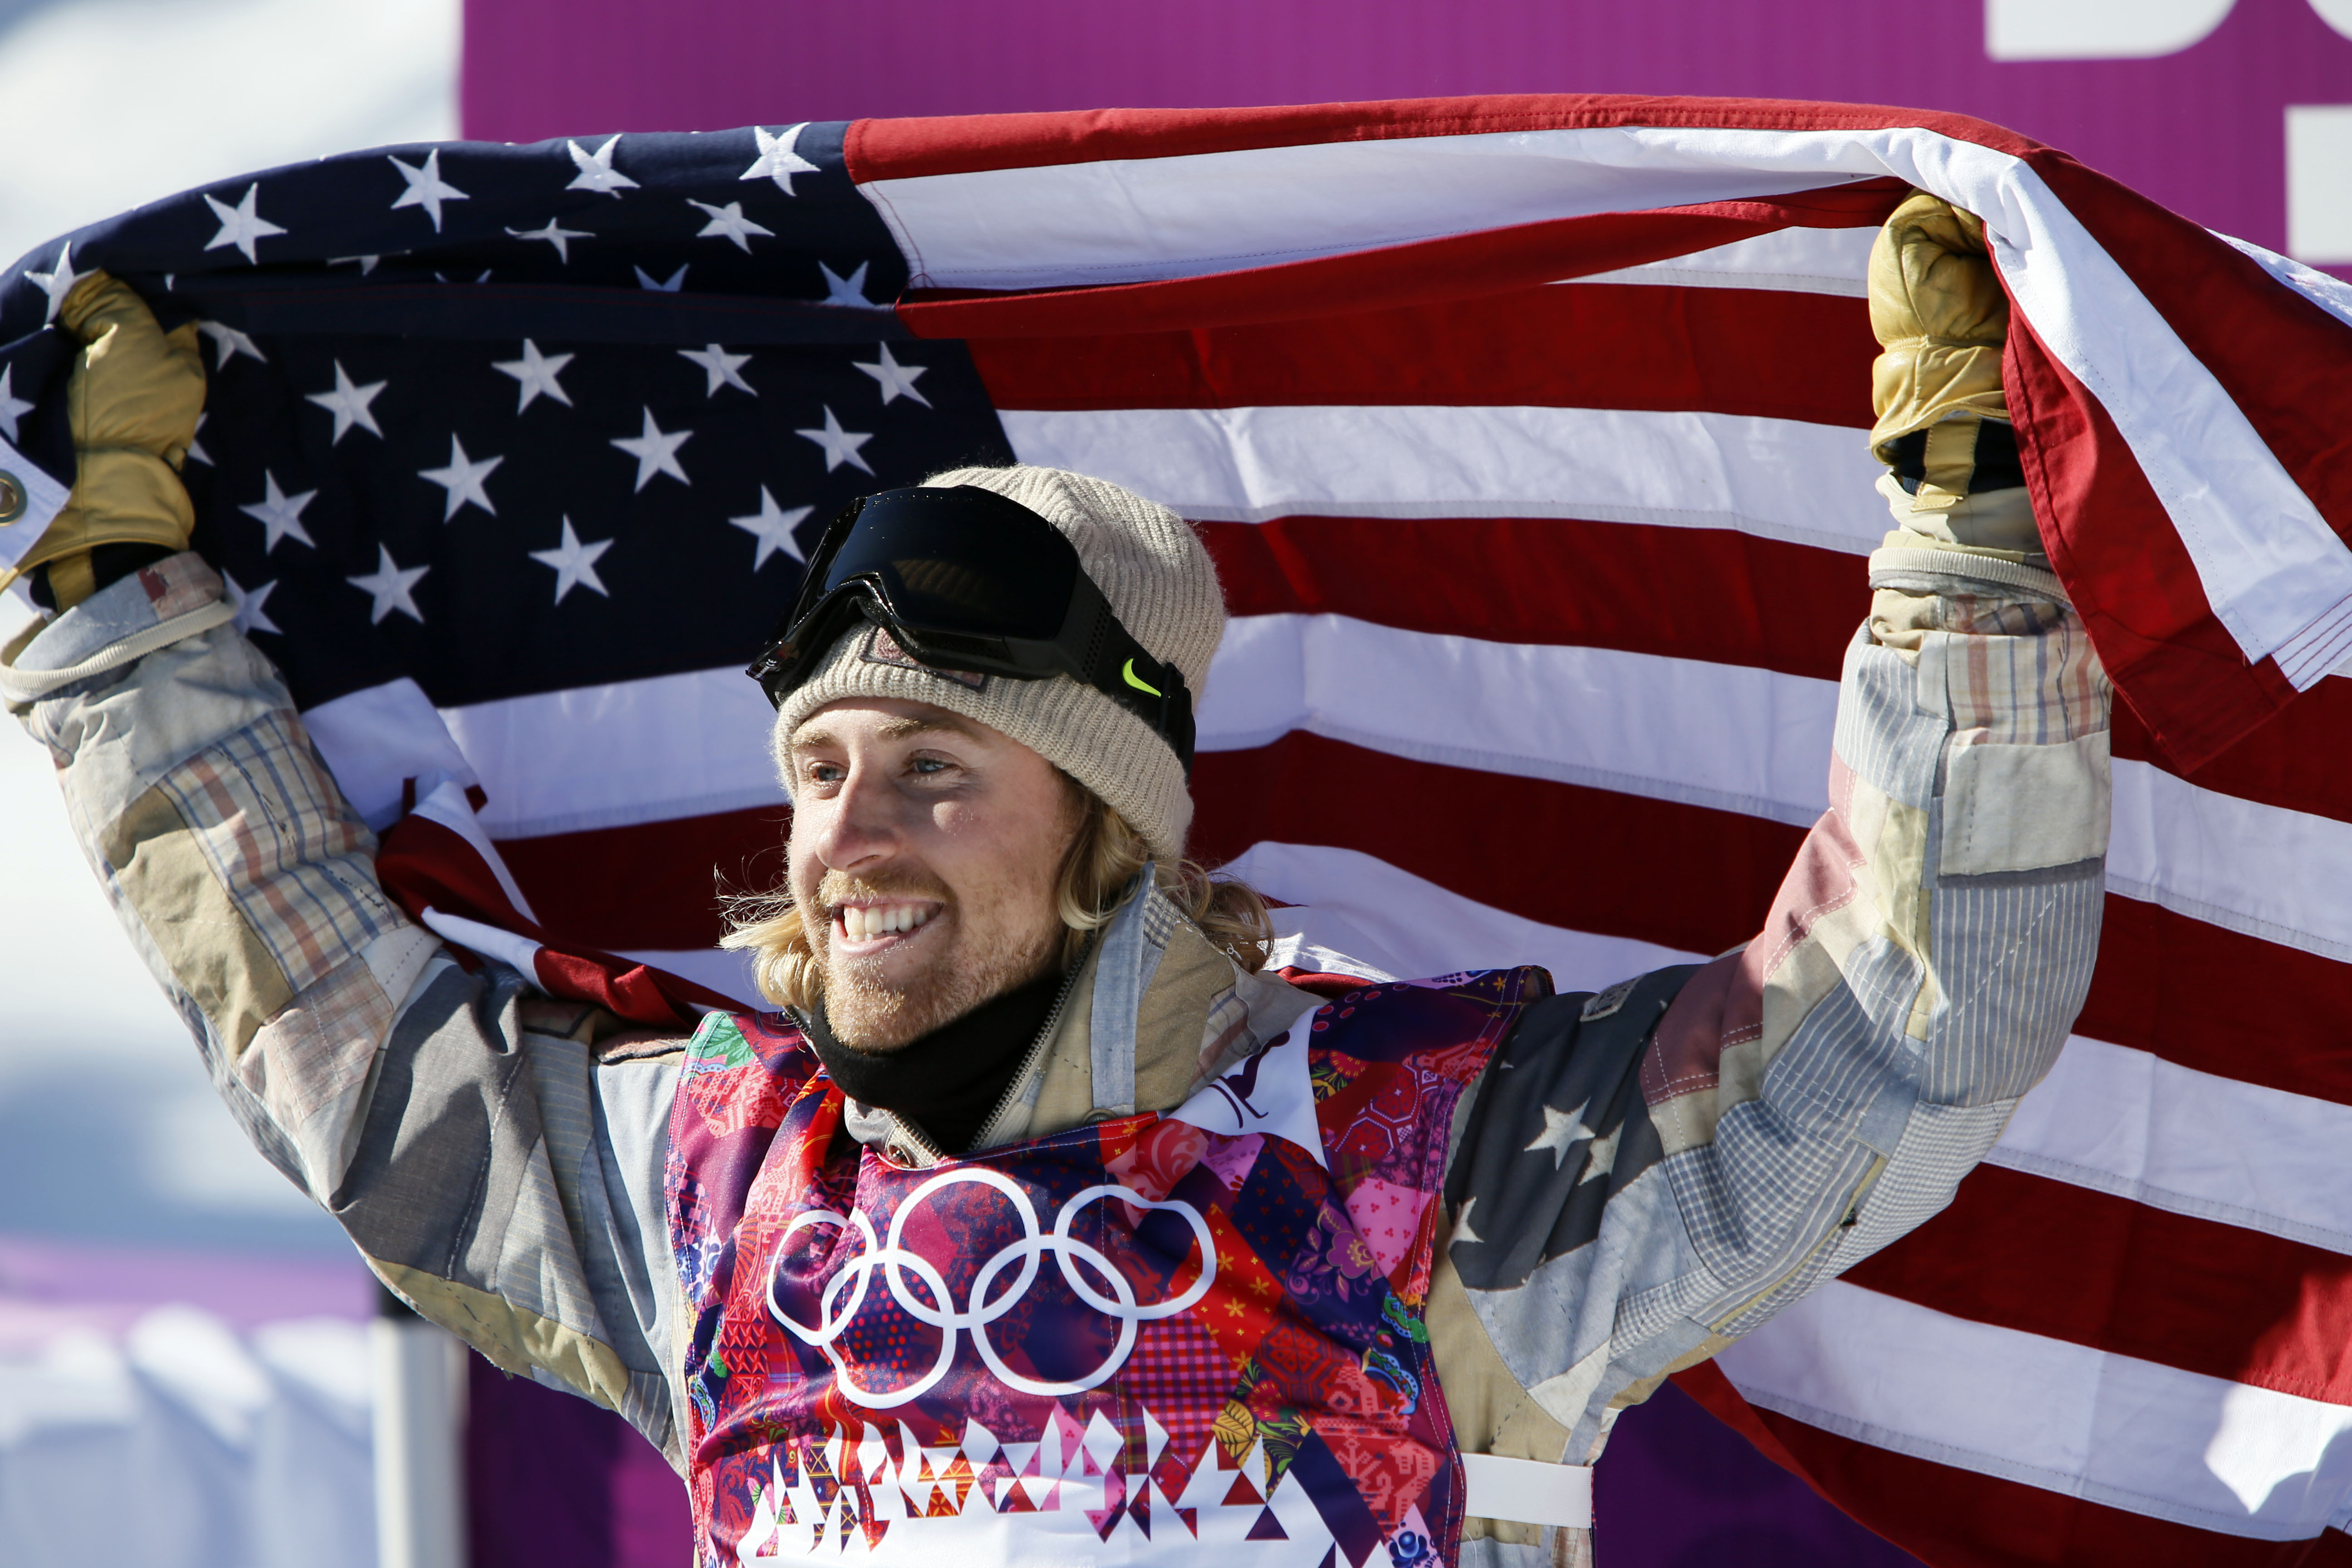 Gold medalist and Park City resident Sage Kotsenburg. (USA TODAY Sports Images)